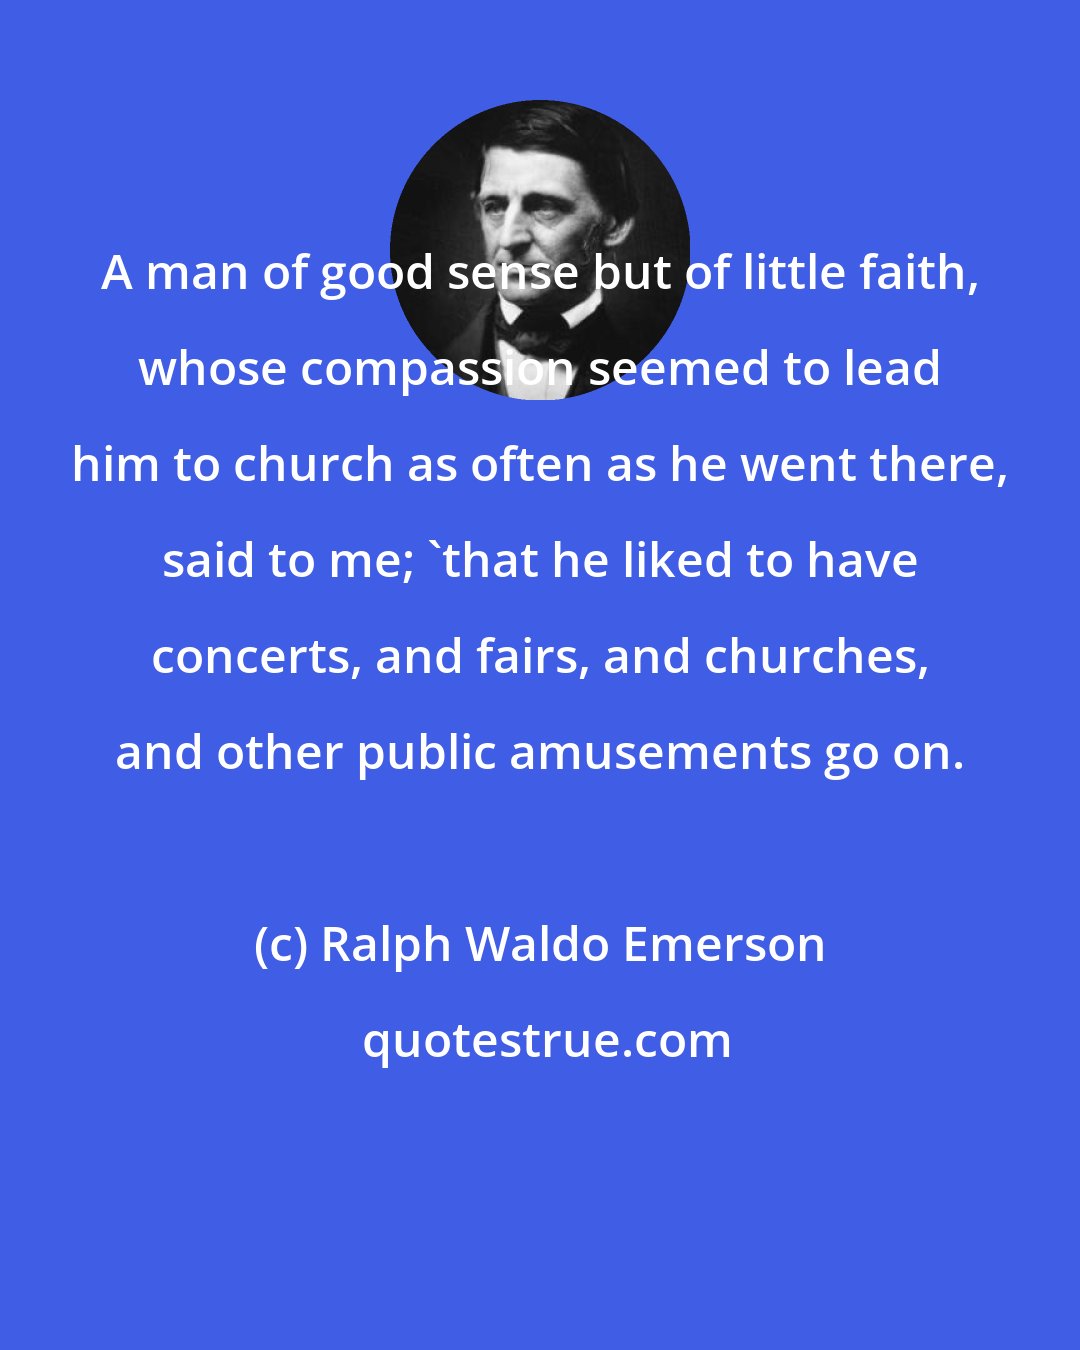 Ralph Waldo Emerson: A man of good sense but of little faith, whose compassion seemed to lead him to church as often as he went there, said to me; 'that he liked to have concerts, and fairs, and churches, and other public amusements go on.